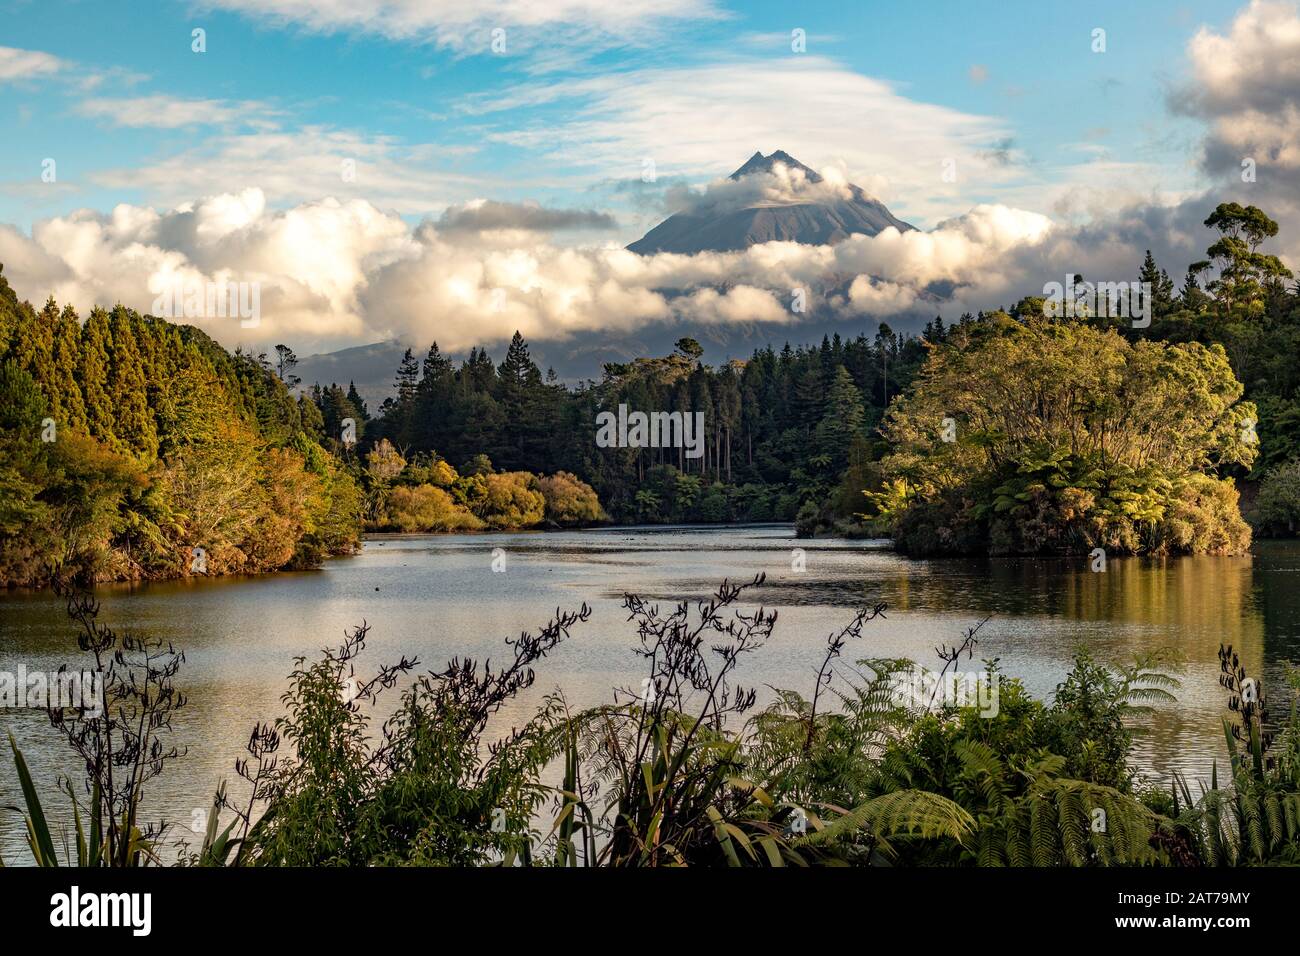 Scenic view on Mount Taranaki (Mount Egmont) in beautiful clouds over a forest and a lake. New Zealand, North Island Stock Photo